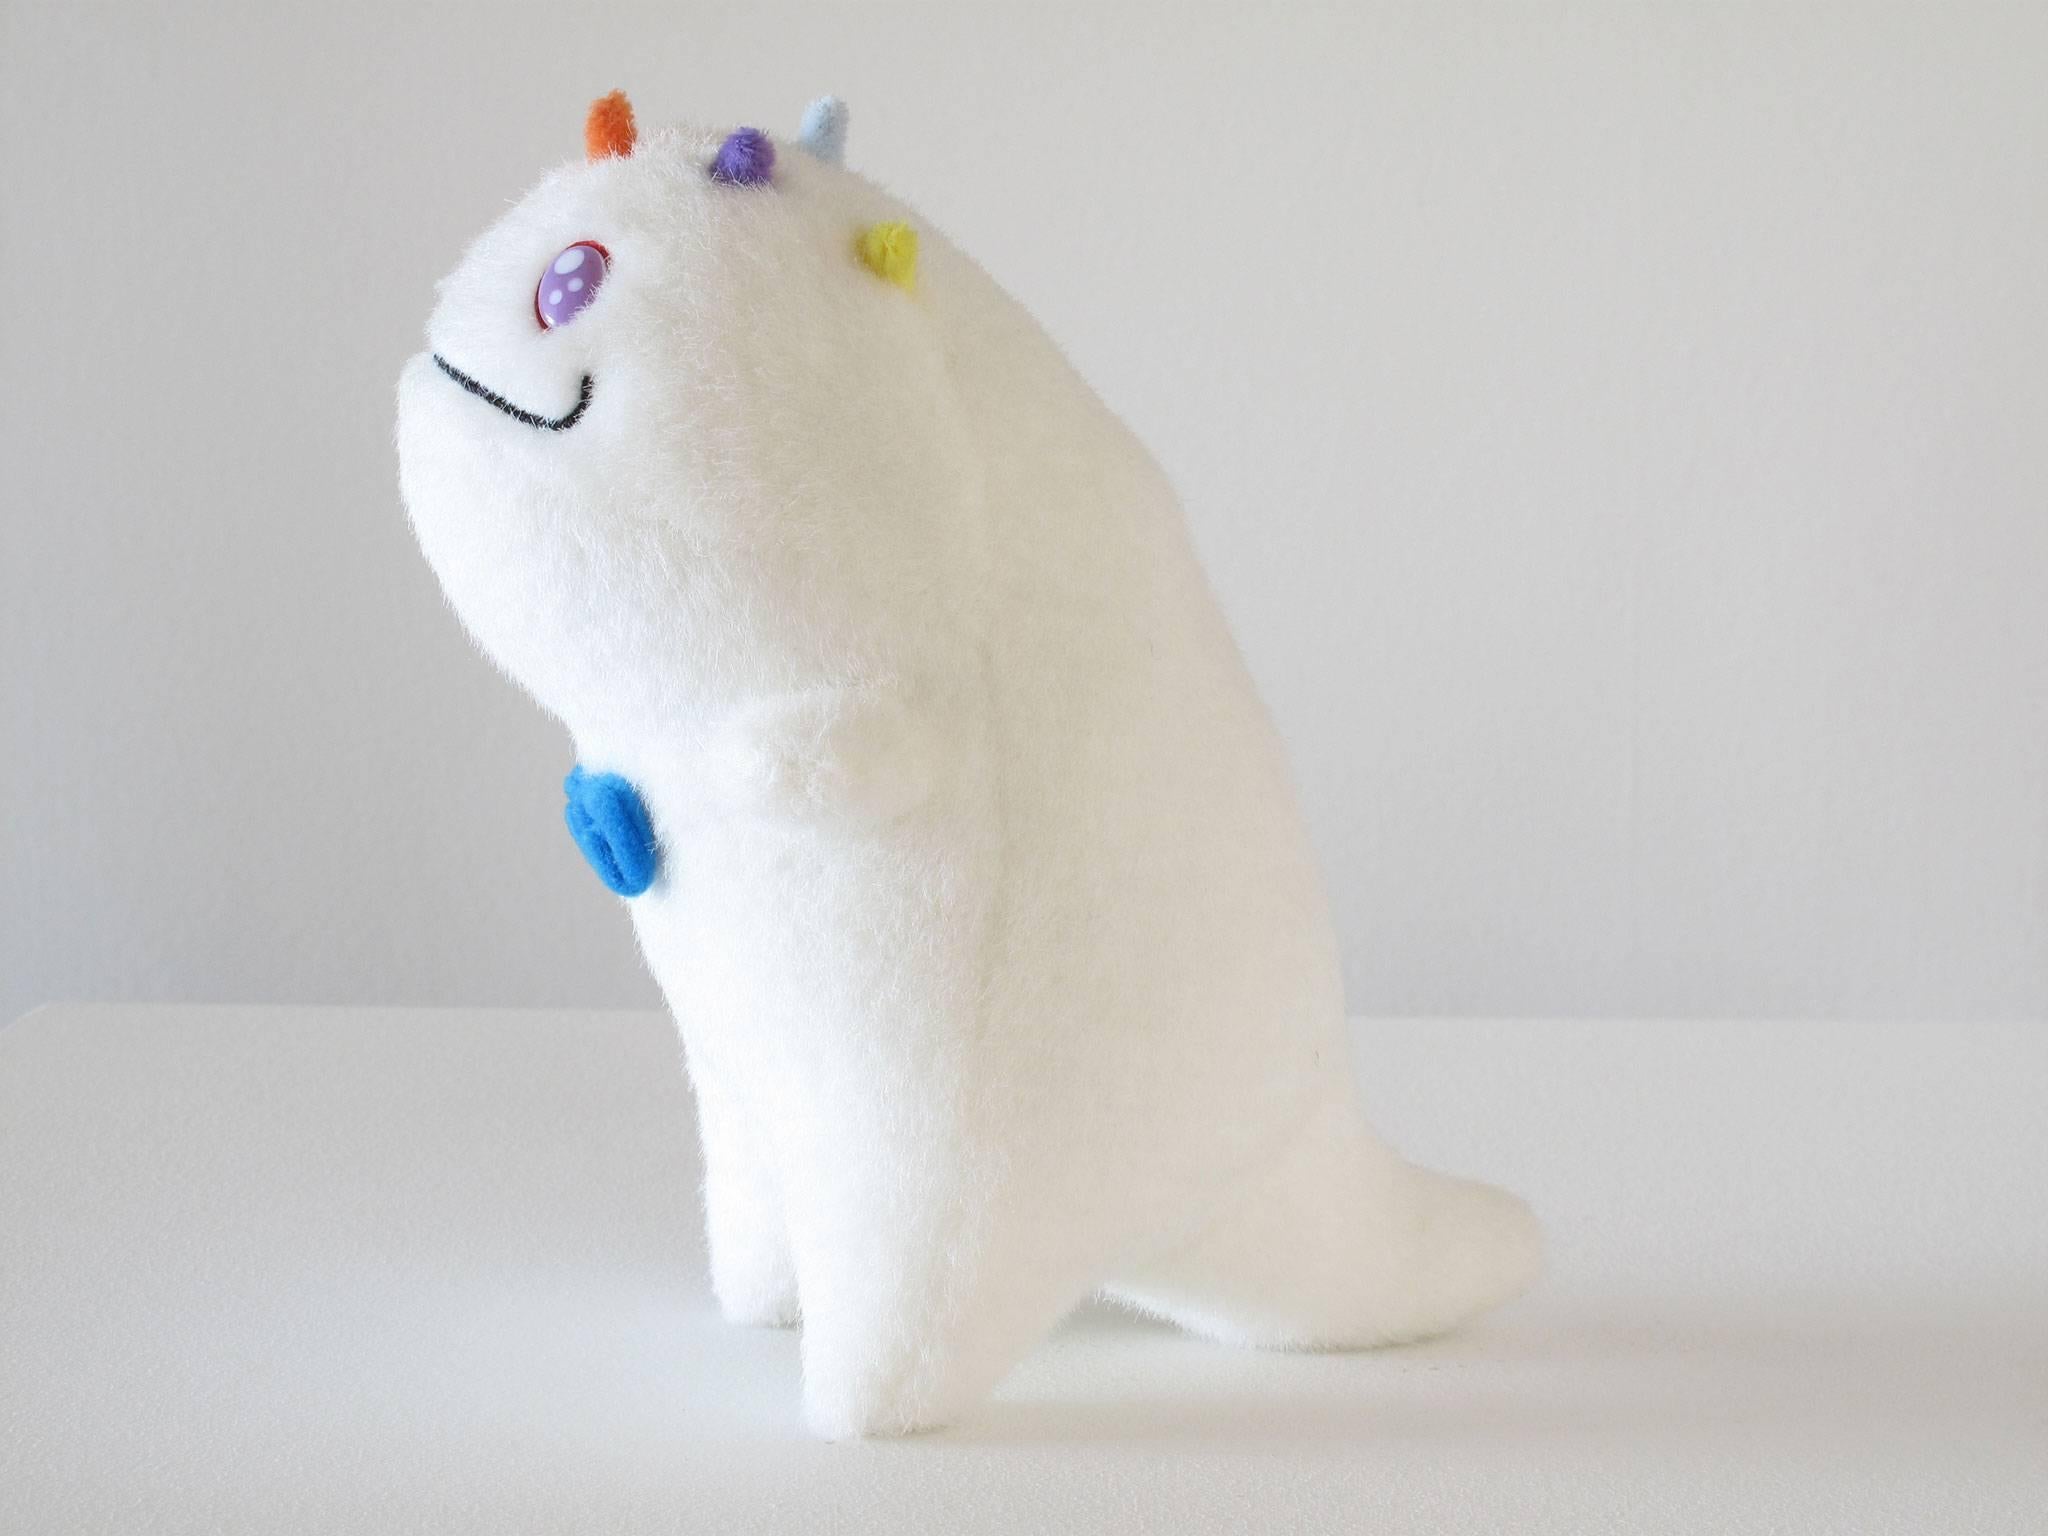 Fun, fuzzy friend by Takashi Murakami, Anime style, fantasy creature, plush toy, art doll made in Japan, acquired from Moca 'Murakami' exhibition in 2007. Dimensions: 7.25 high x 4 wide x 6.5 deep inches.